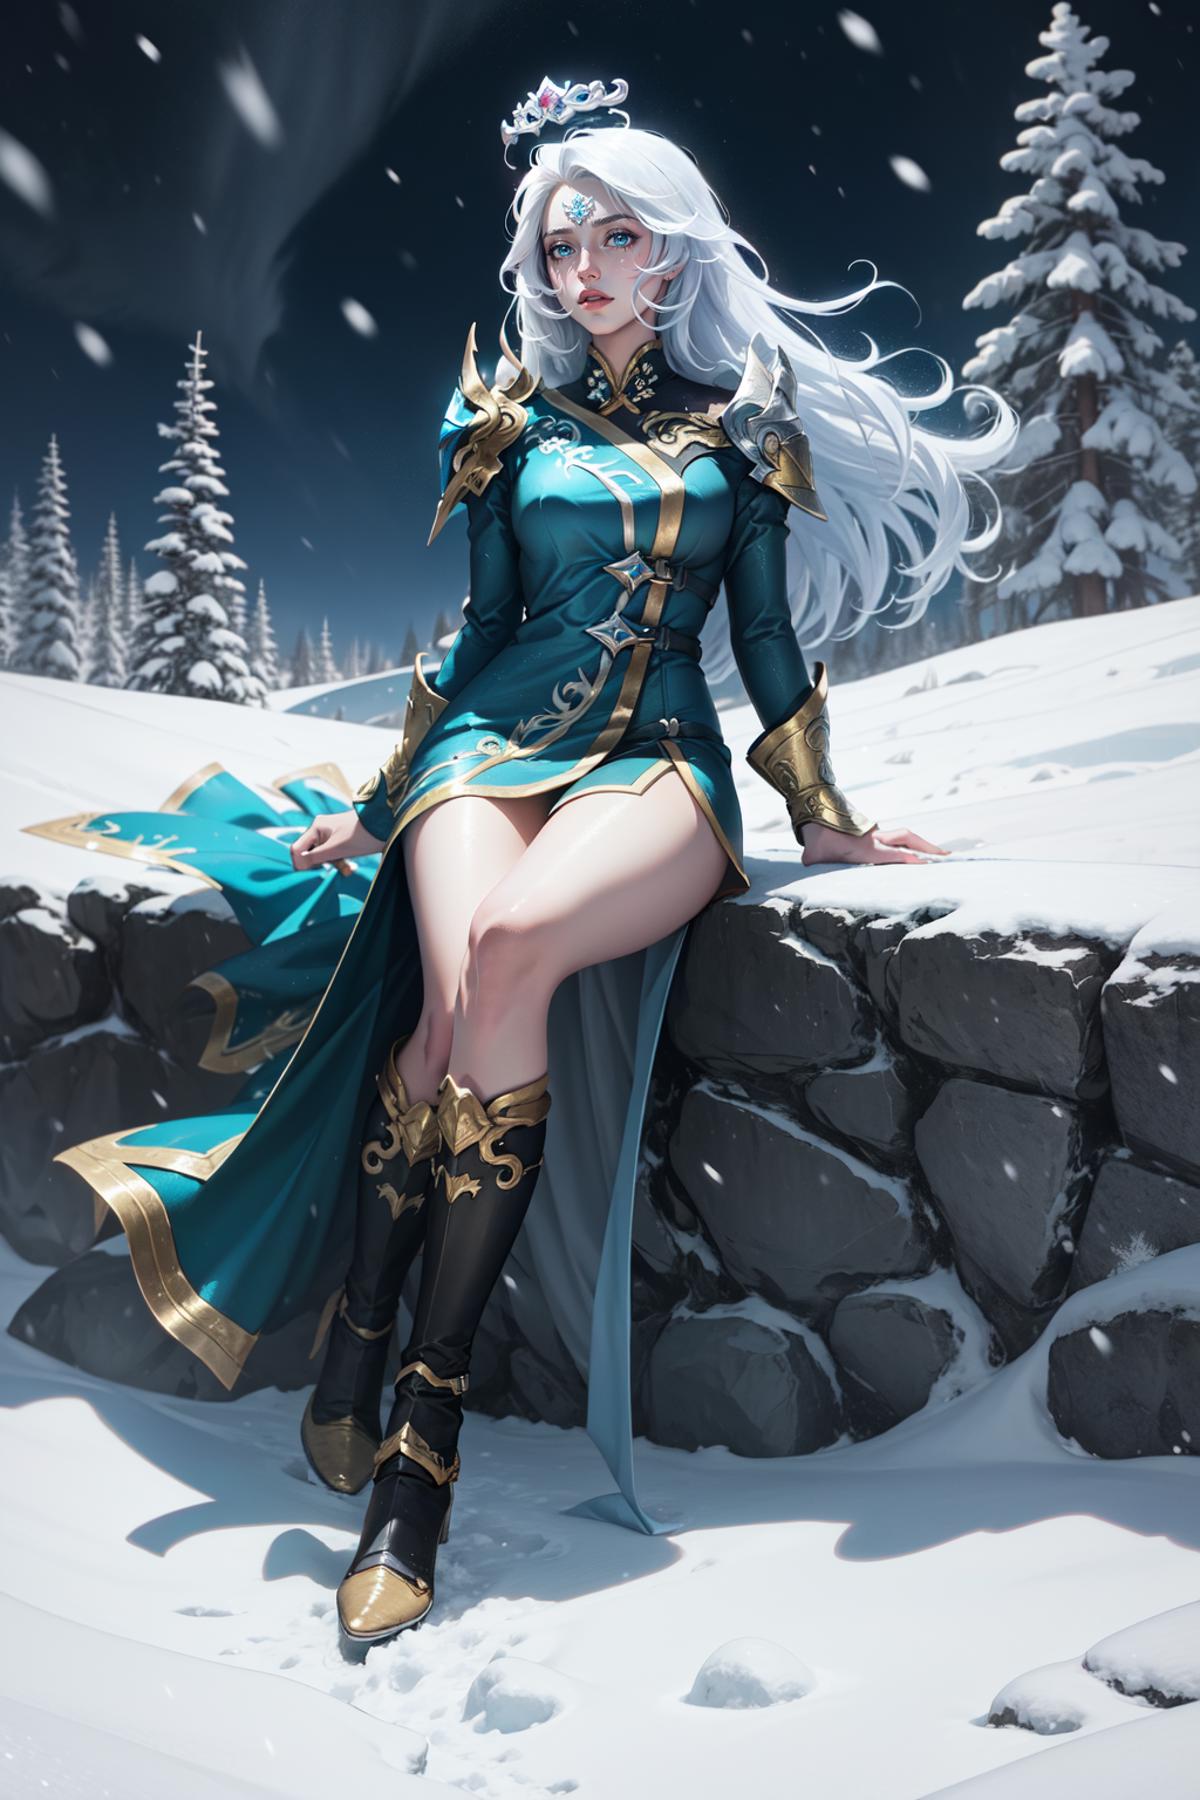 Winterblessed Diana | League of Legends image by AhriMain